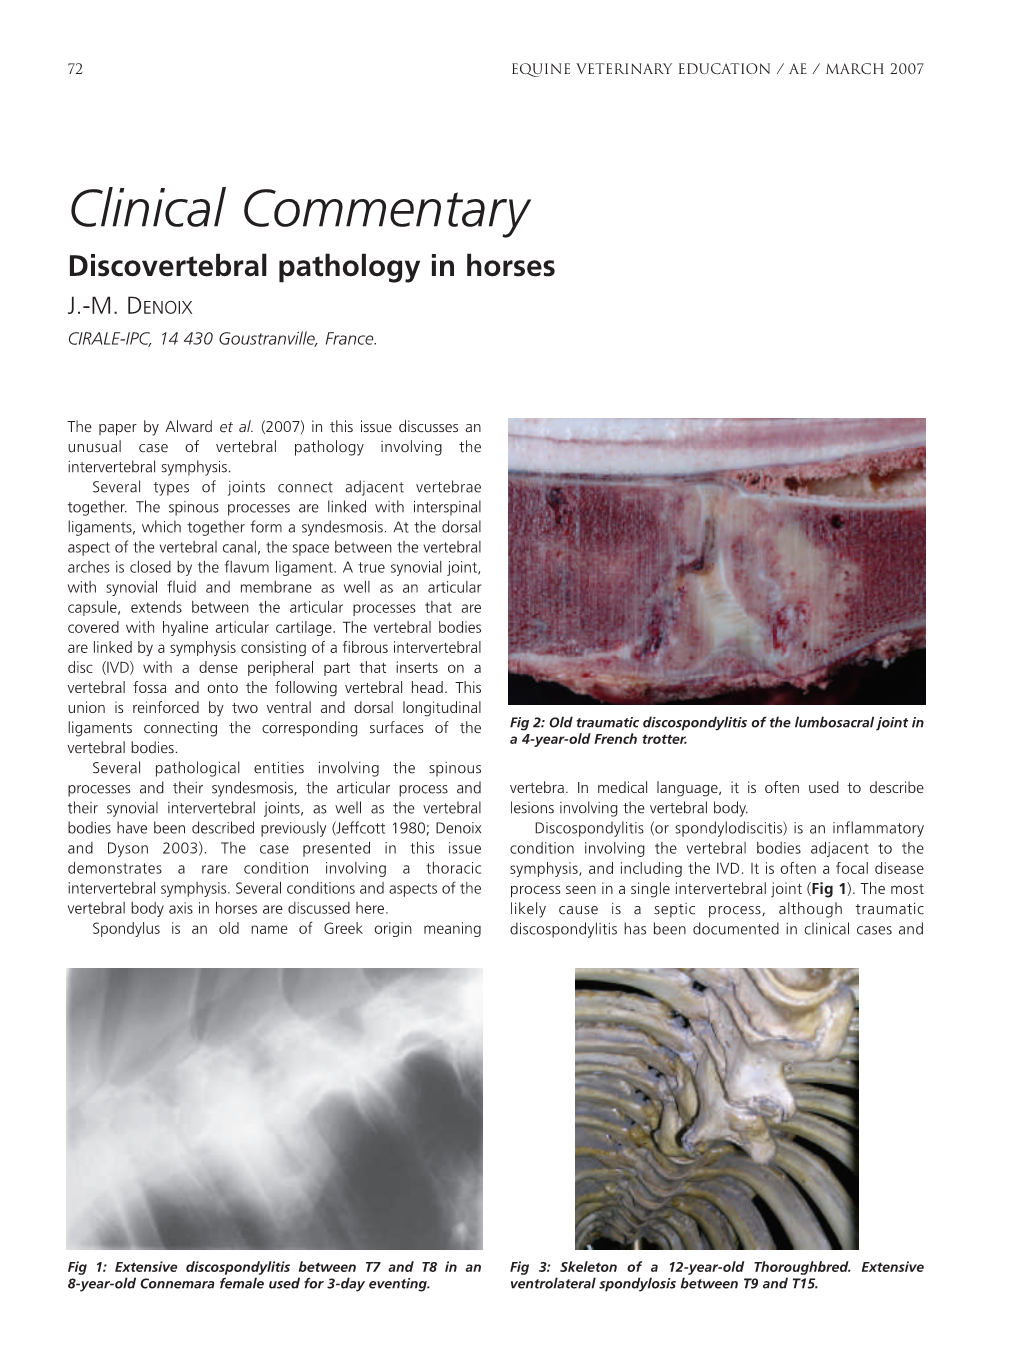 Clinical Commentary Discovertebral Pathology in Horses J.-M